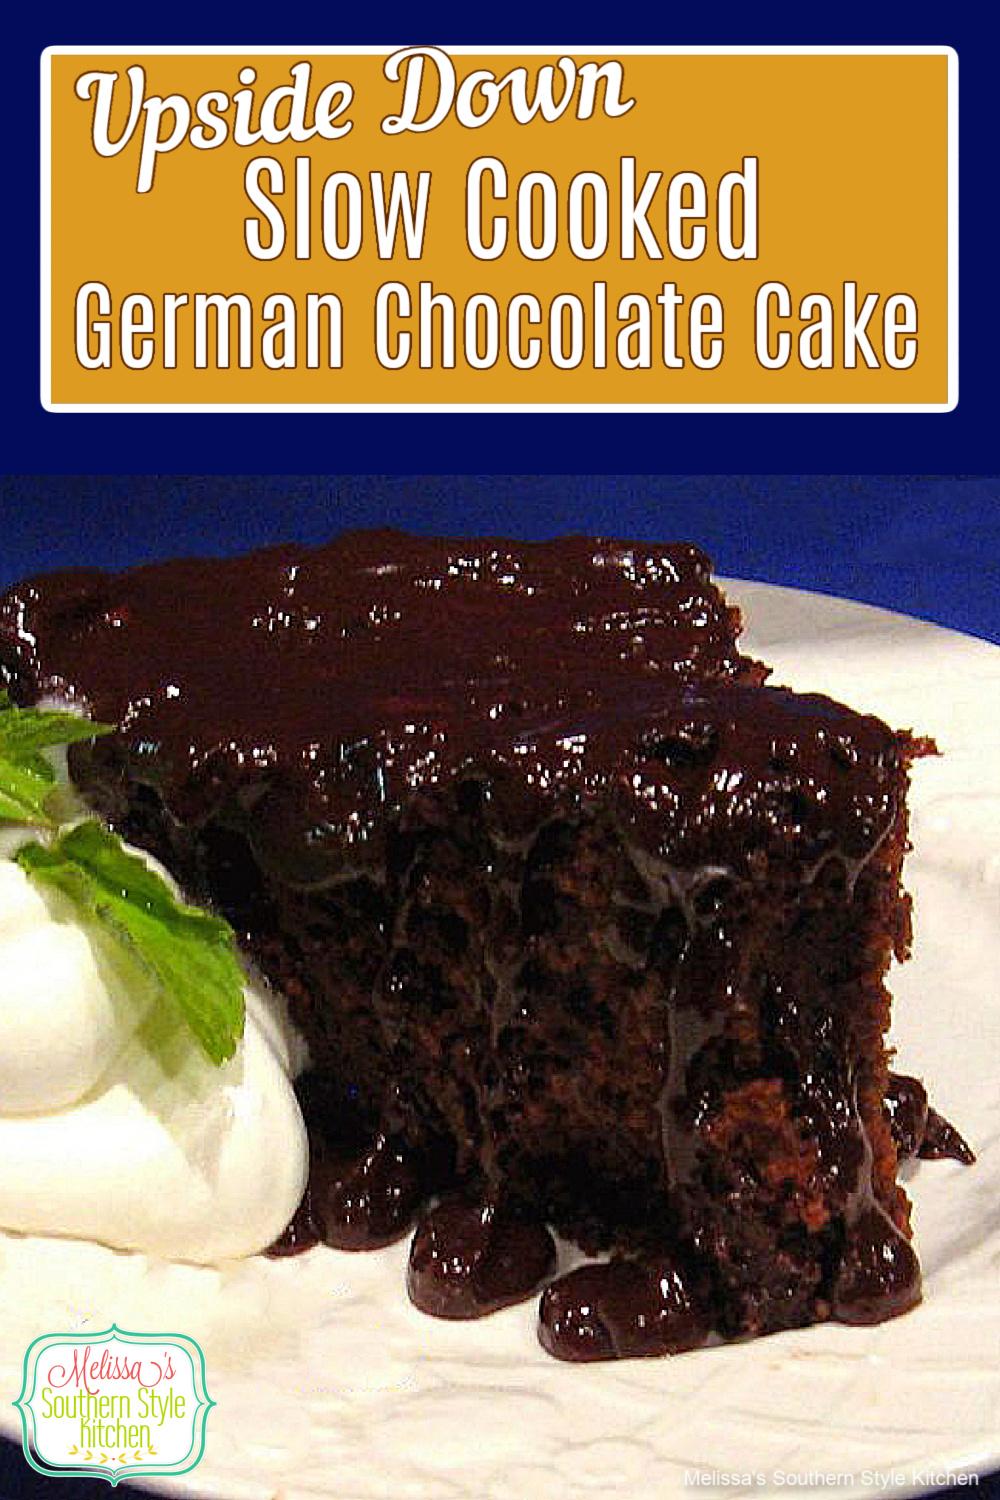 This upside down Slow Cooked German Chocolate Cake can be served warm with vanilla ice cream or a dollop of fresh whipped cream #slowcookerchocolatecake #crockpotcakerecipes #germanchocolatecake #chocolatecake #chocolatecakes #slowcookedgermanchocolatecake #upsidedowncake